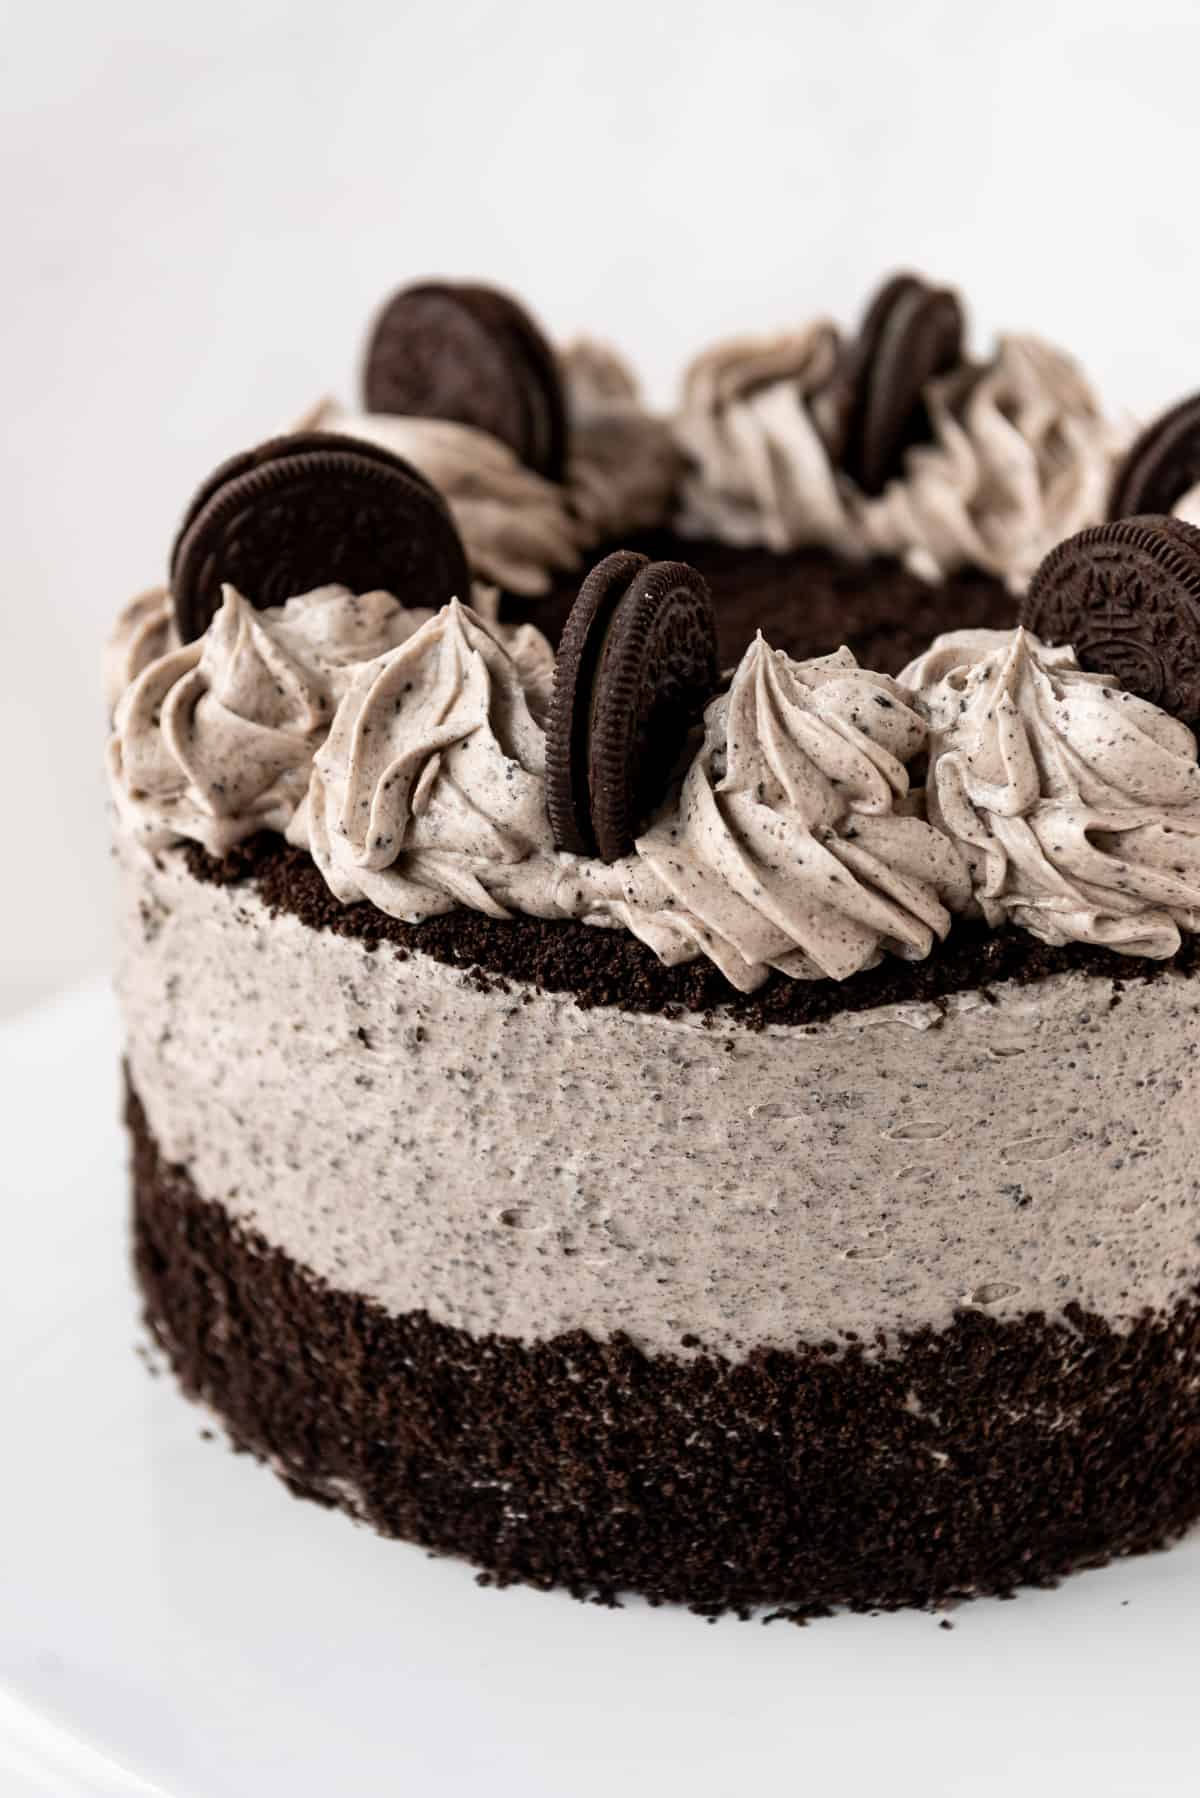 A cookies and cream cake decorated with swirls of Oreo frosting and finely crushed Oreo cookies.